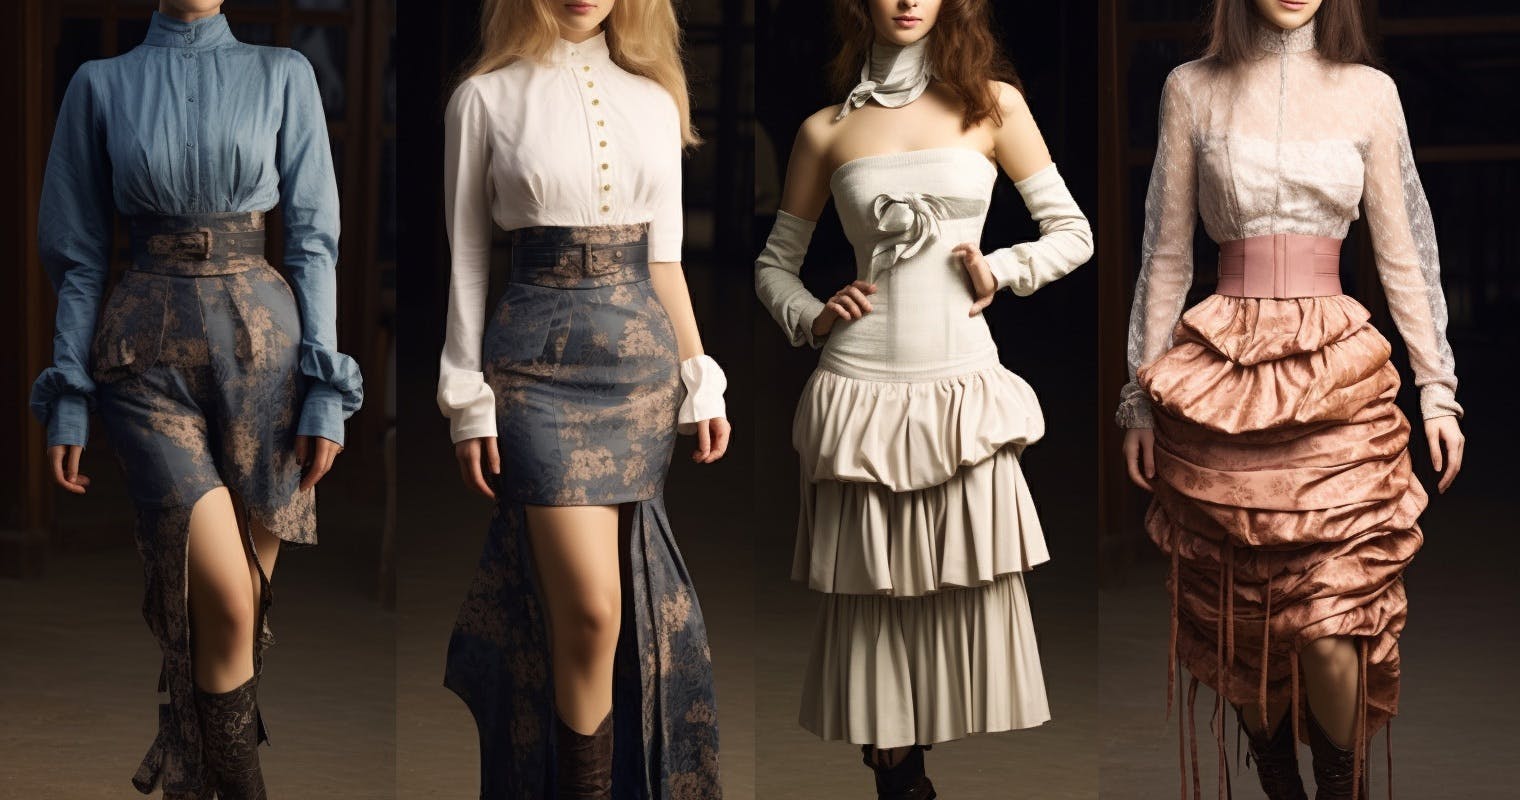 Hobble Skirts fashion trend from the early 1900s - reimagined